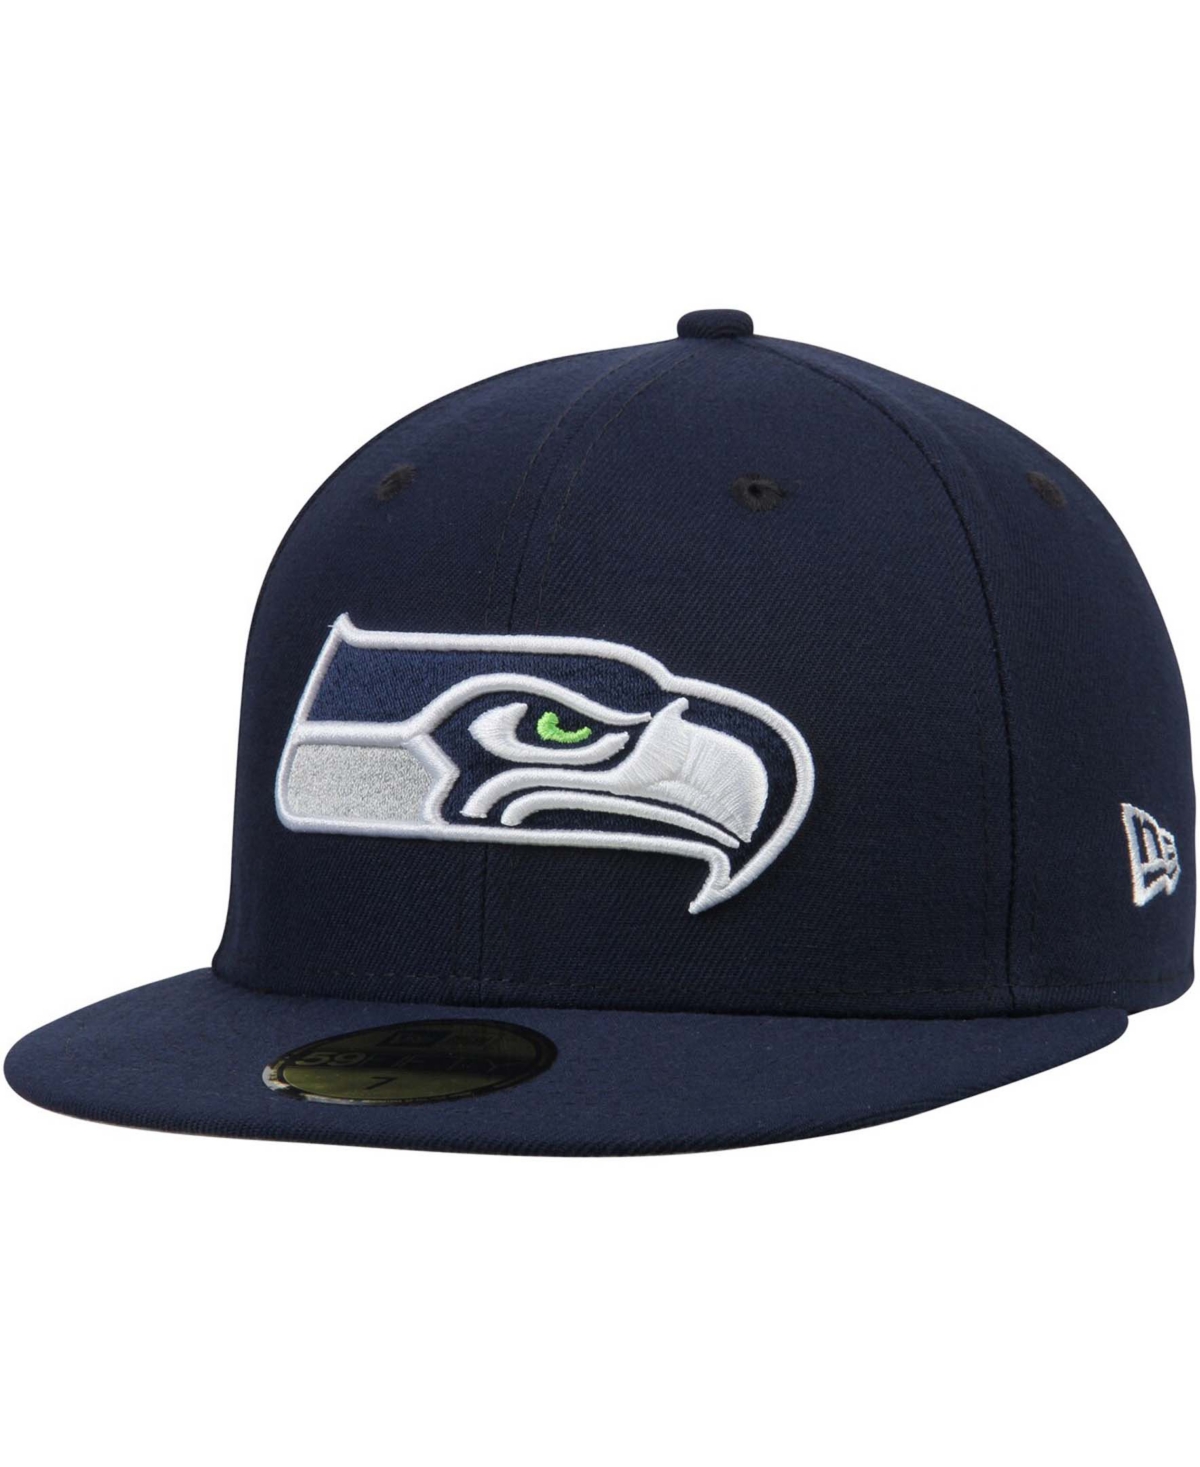 Men's College Navy Seattle Seahawks Omaha 59FIFTY Fitted Hat - Navy